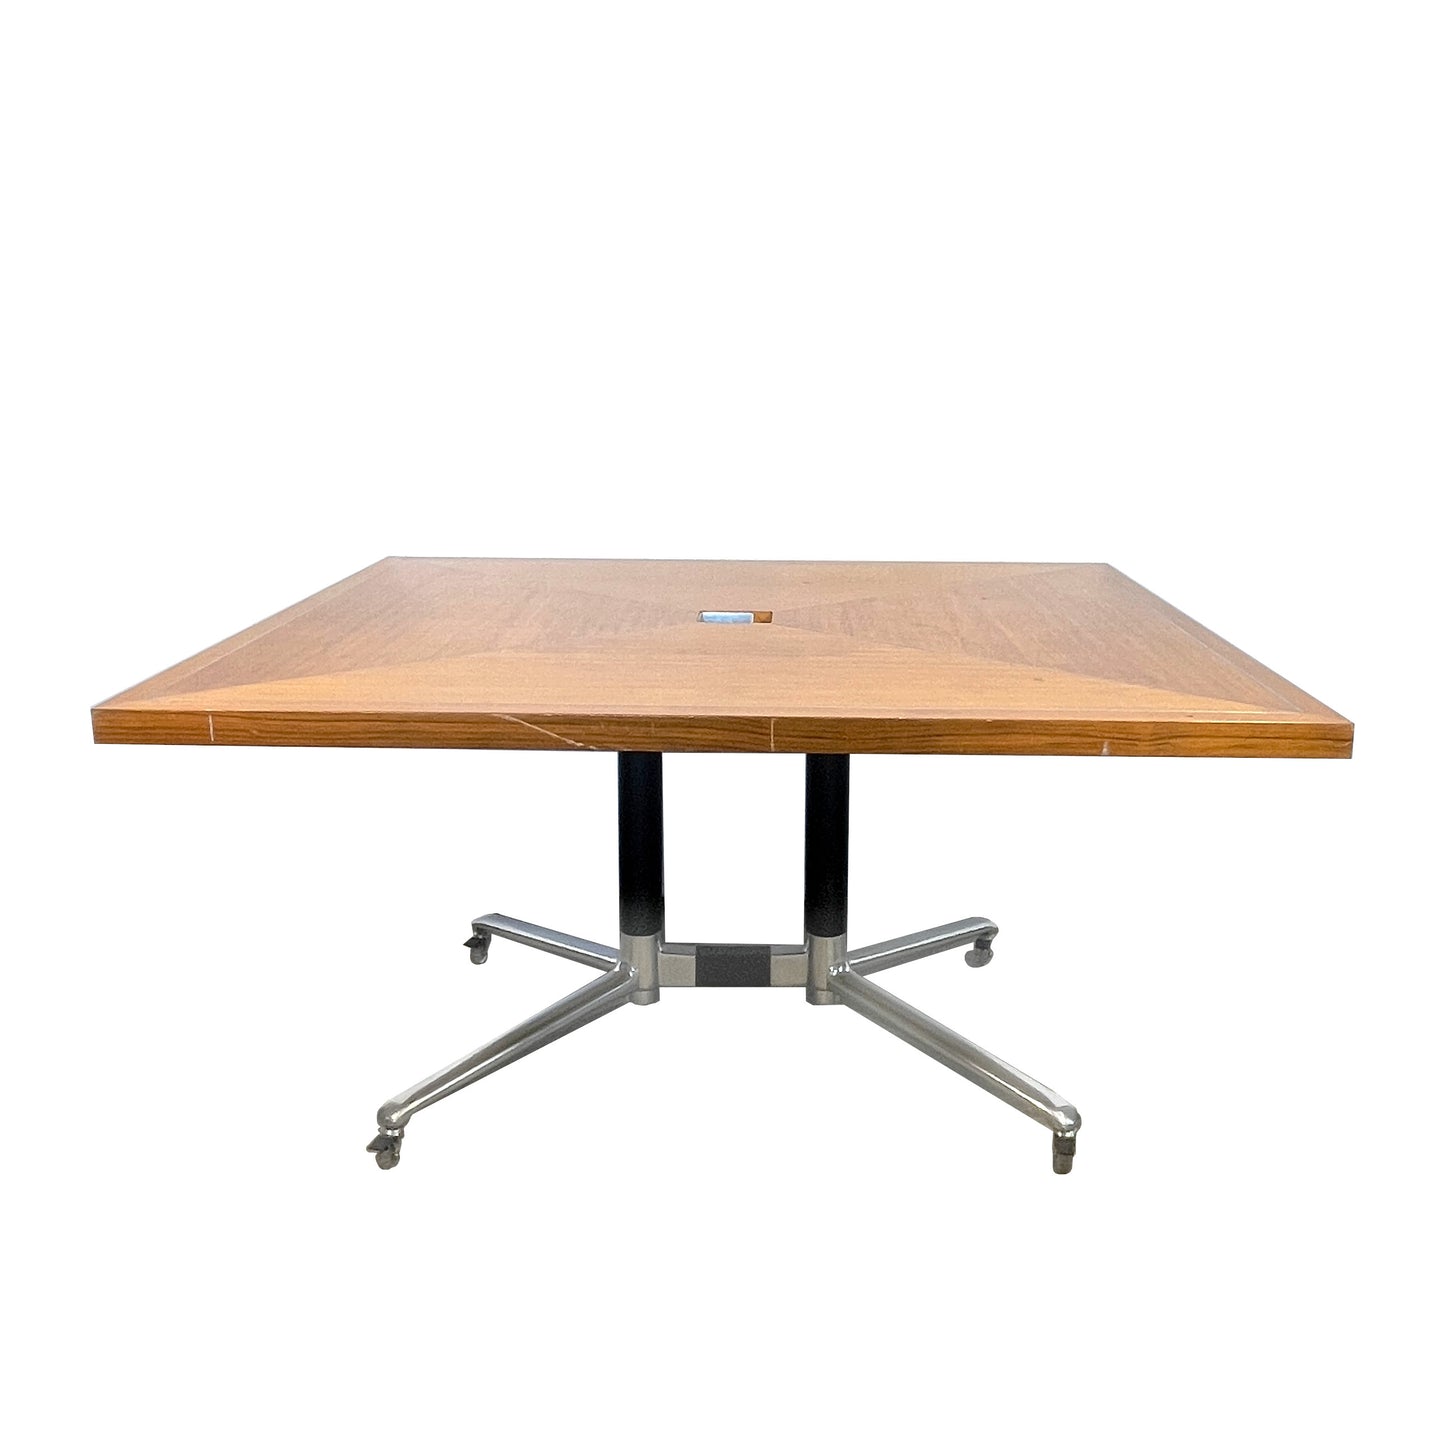 Wooden Meeting Table with Custom Silver Detailing